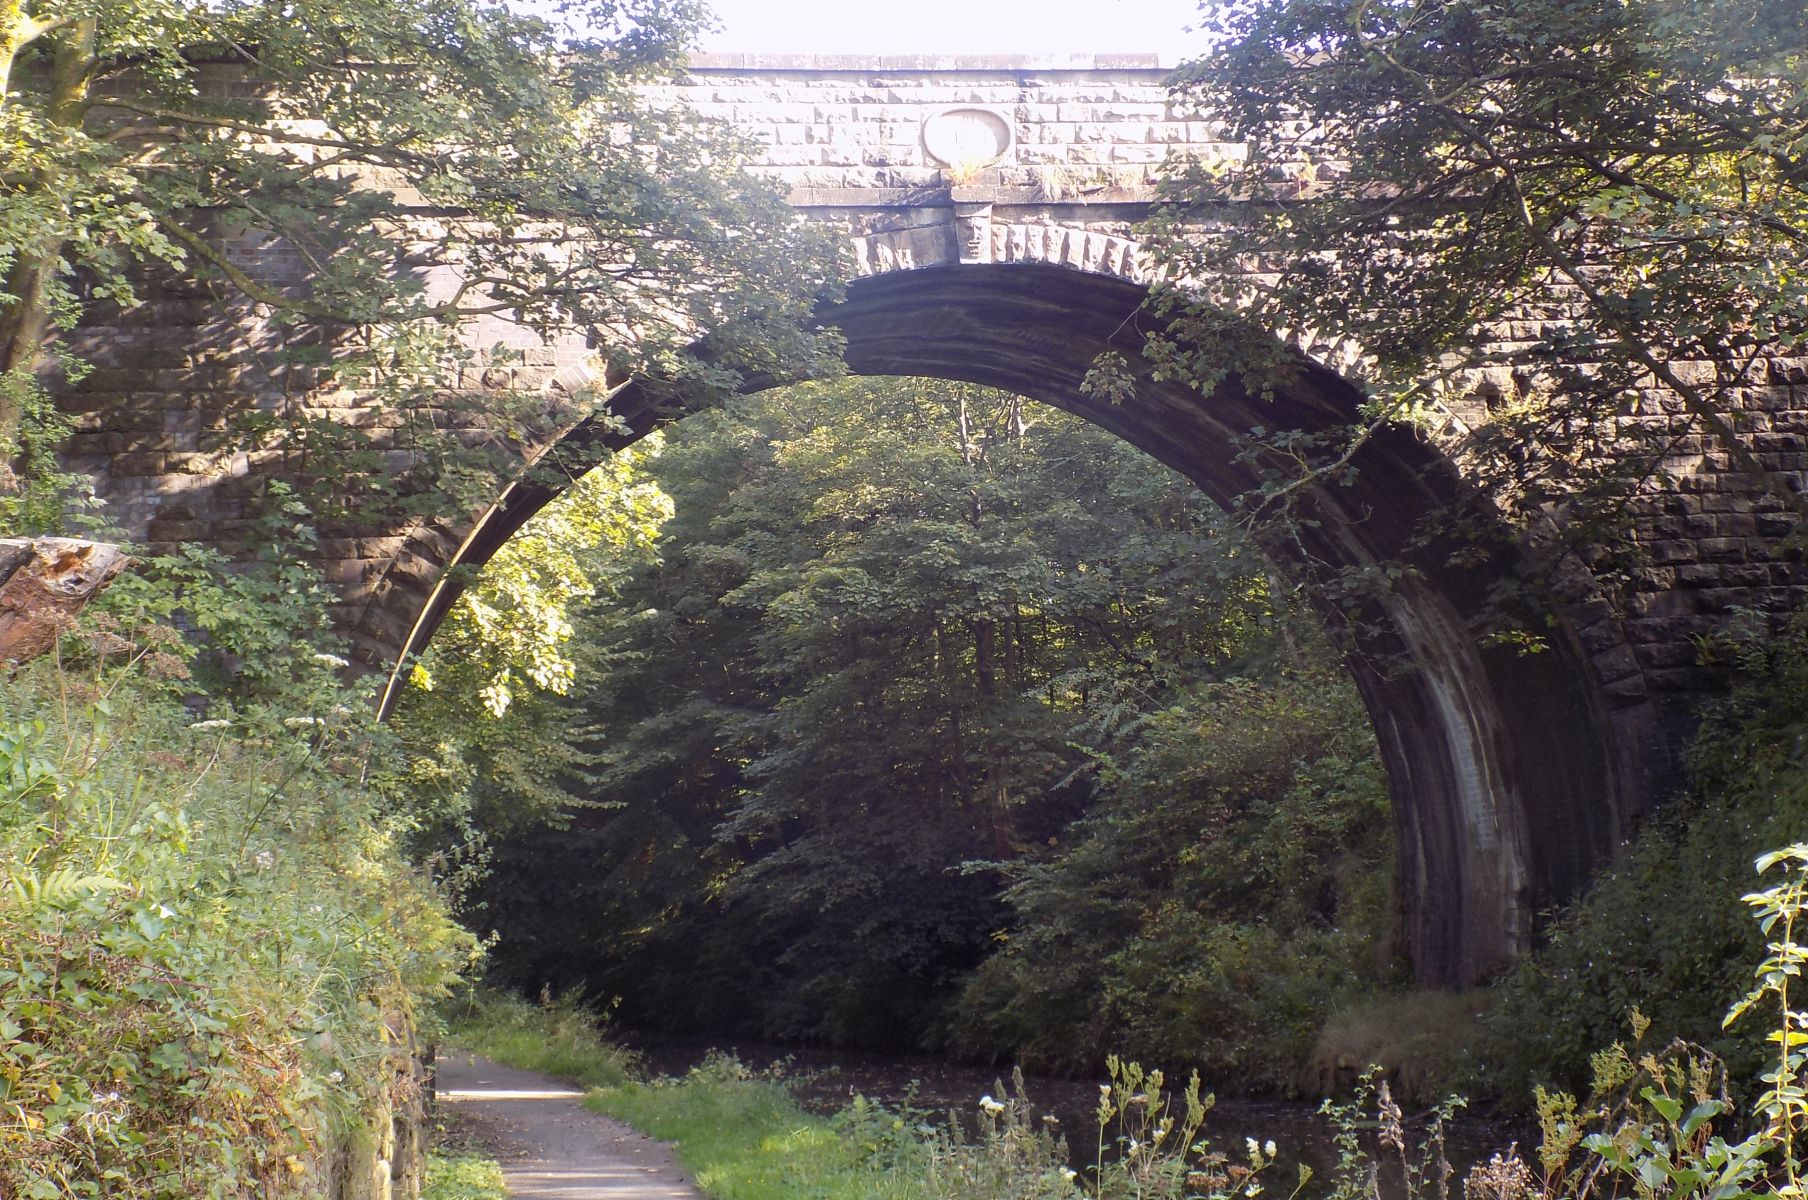 Glen Bridge over Union Canal between Falkirk and Linlithgow